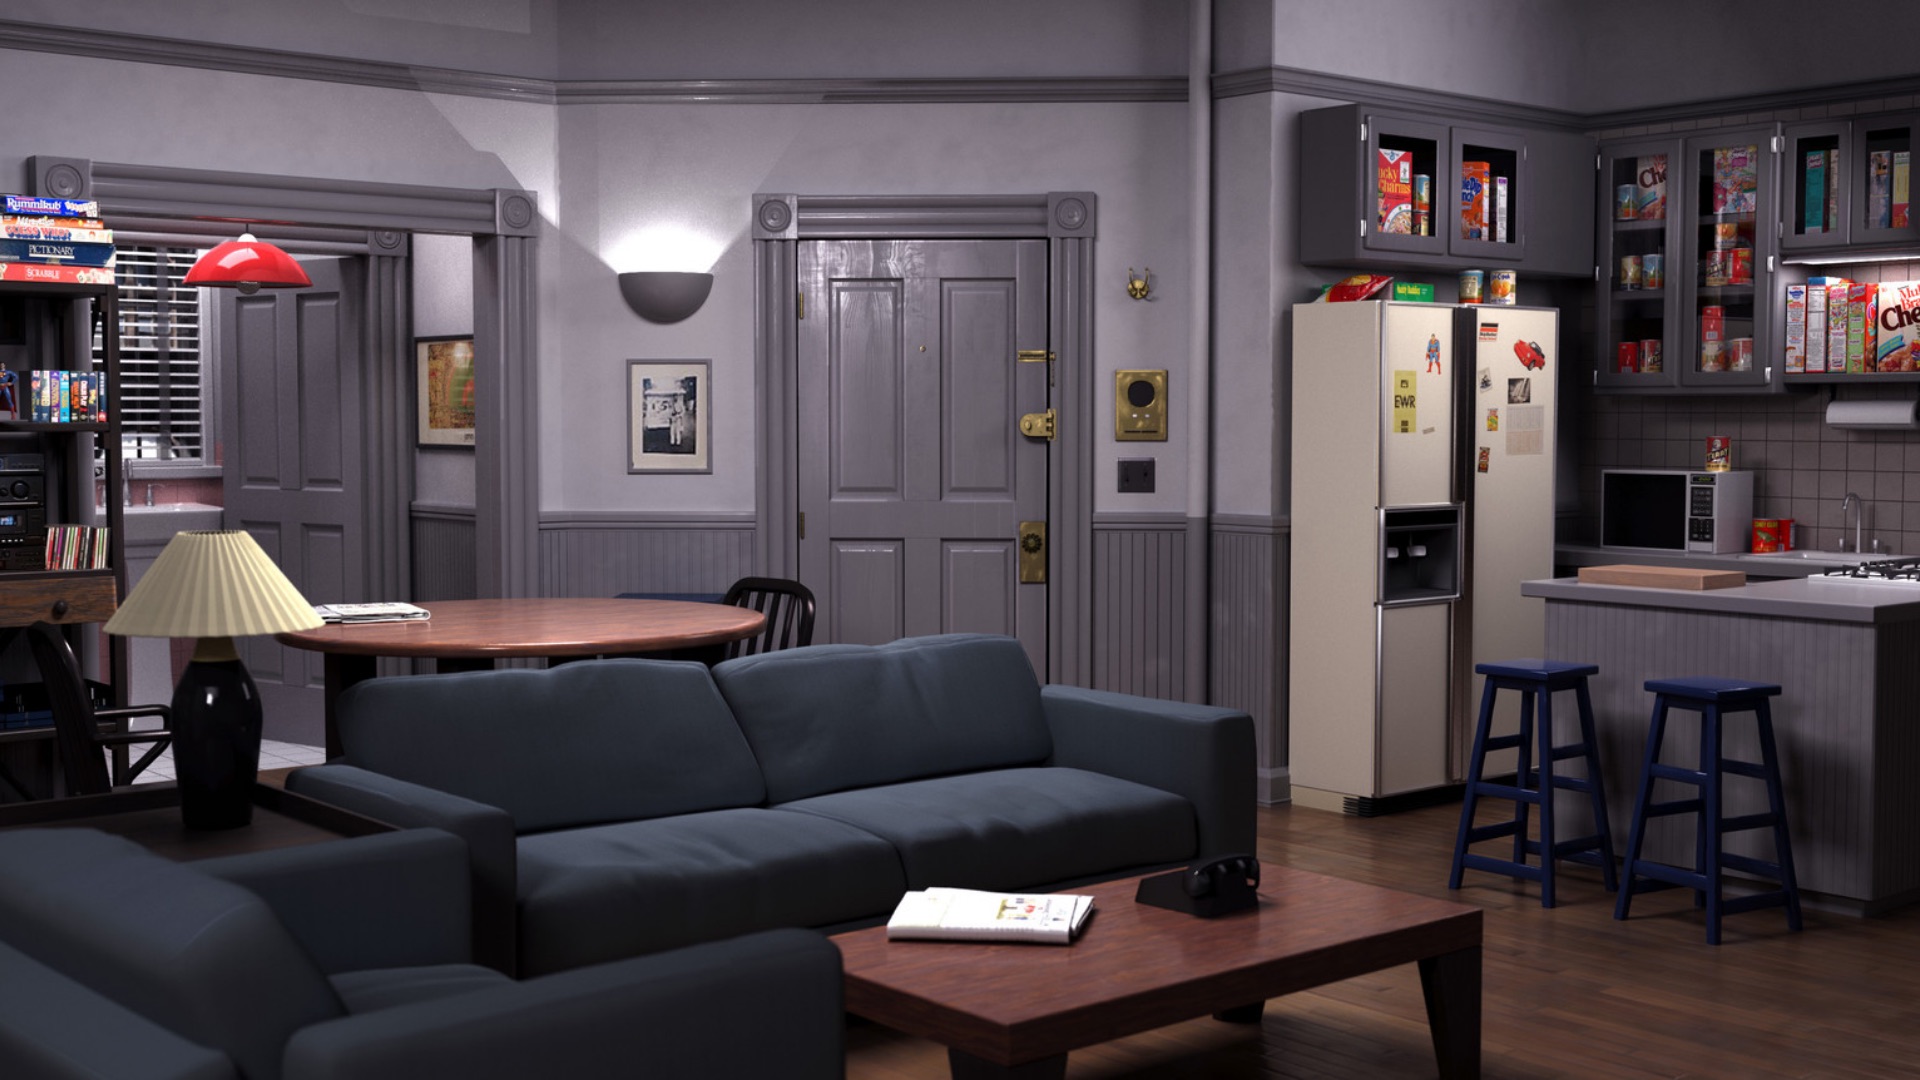 Seinfeld apartment. Virtual background to use on Zoom, Microsoft Teams, Skype, Google Meet, WebEx or any other compatible app.